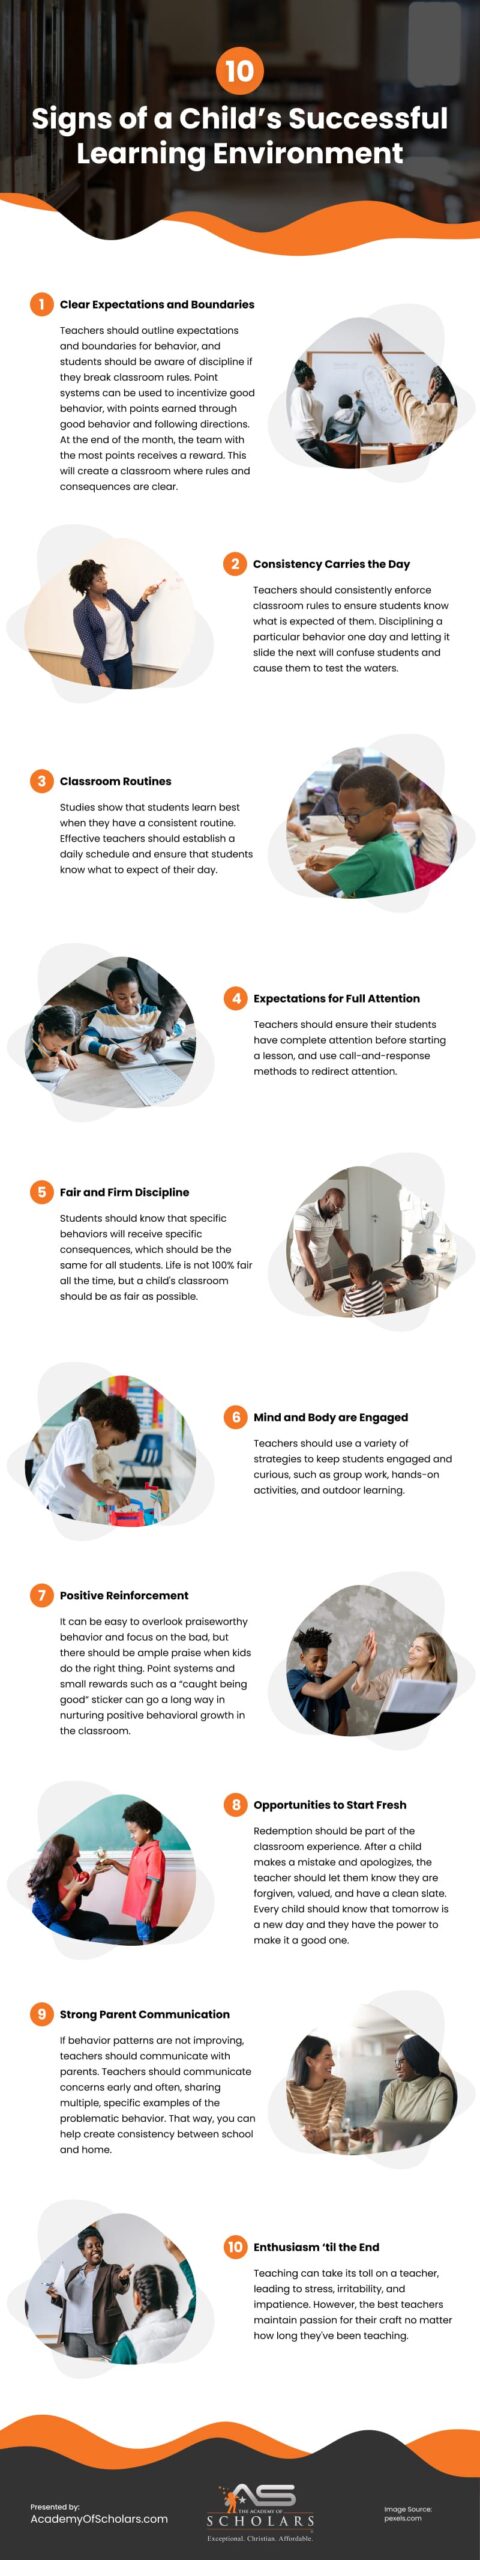 10 Signs of a Child’s Successful Learning Environment Infographic